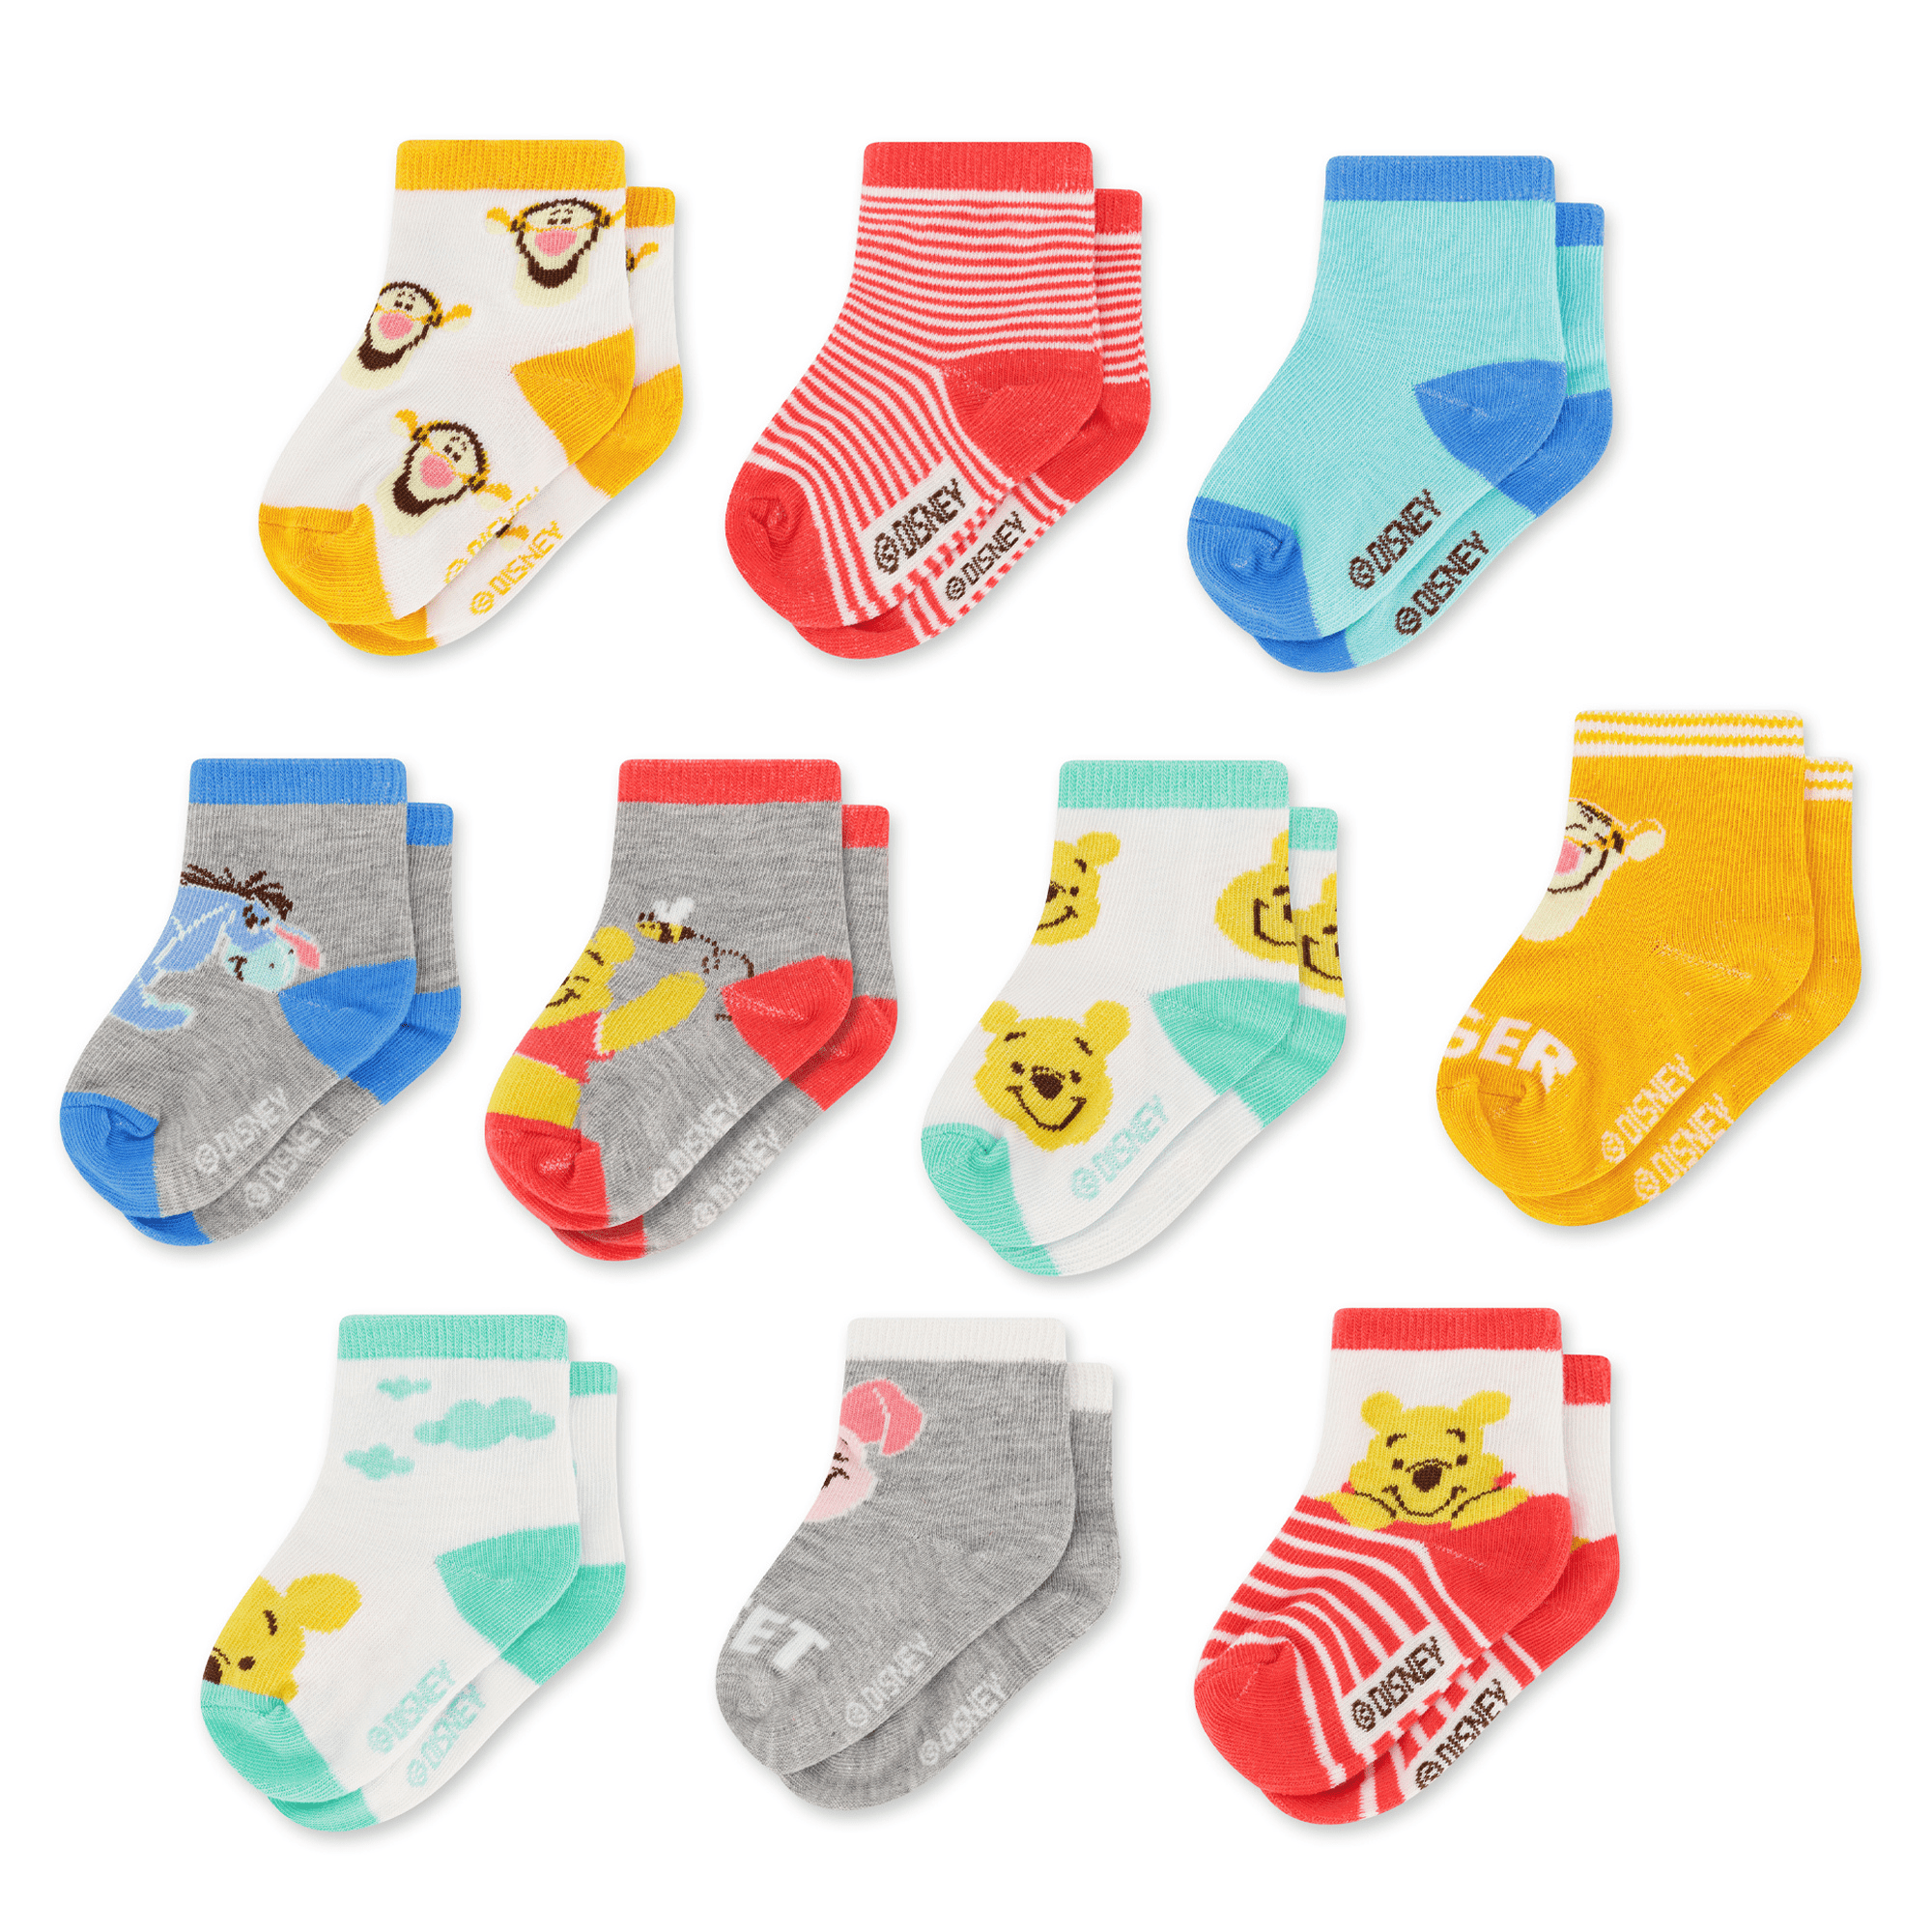 BOYS CHILDRENS KIDS CHARACTER SOCKS COTTON 6 PAIRS PACK ASSORTED NEW *CHOOSE* 